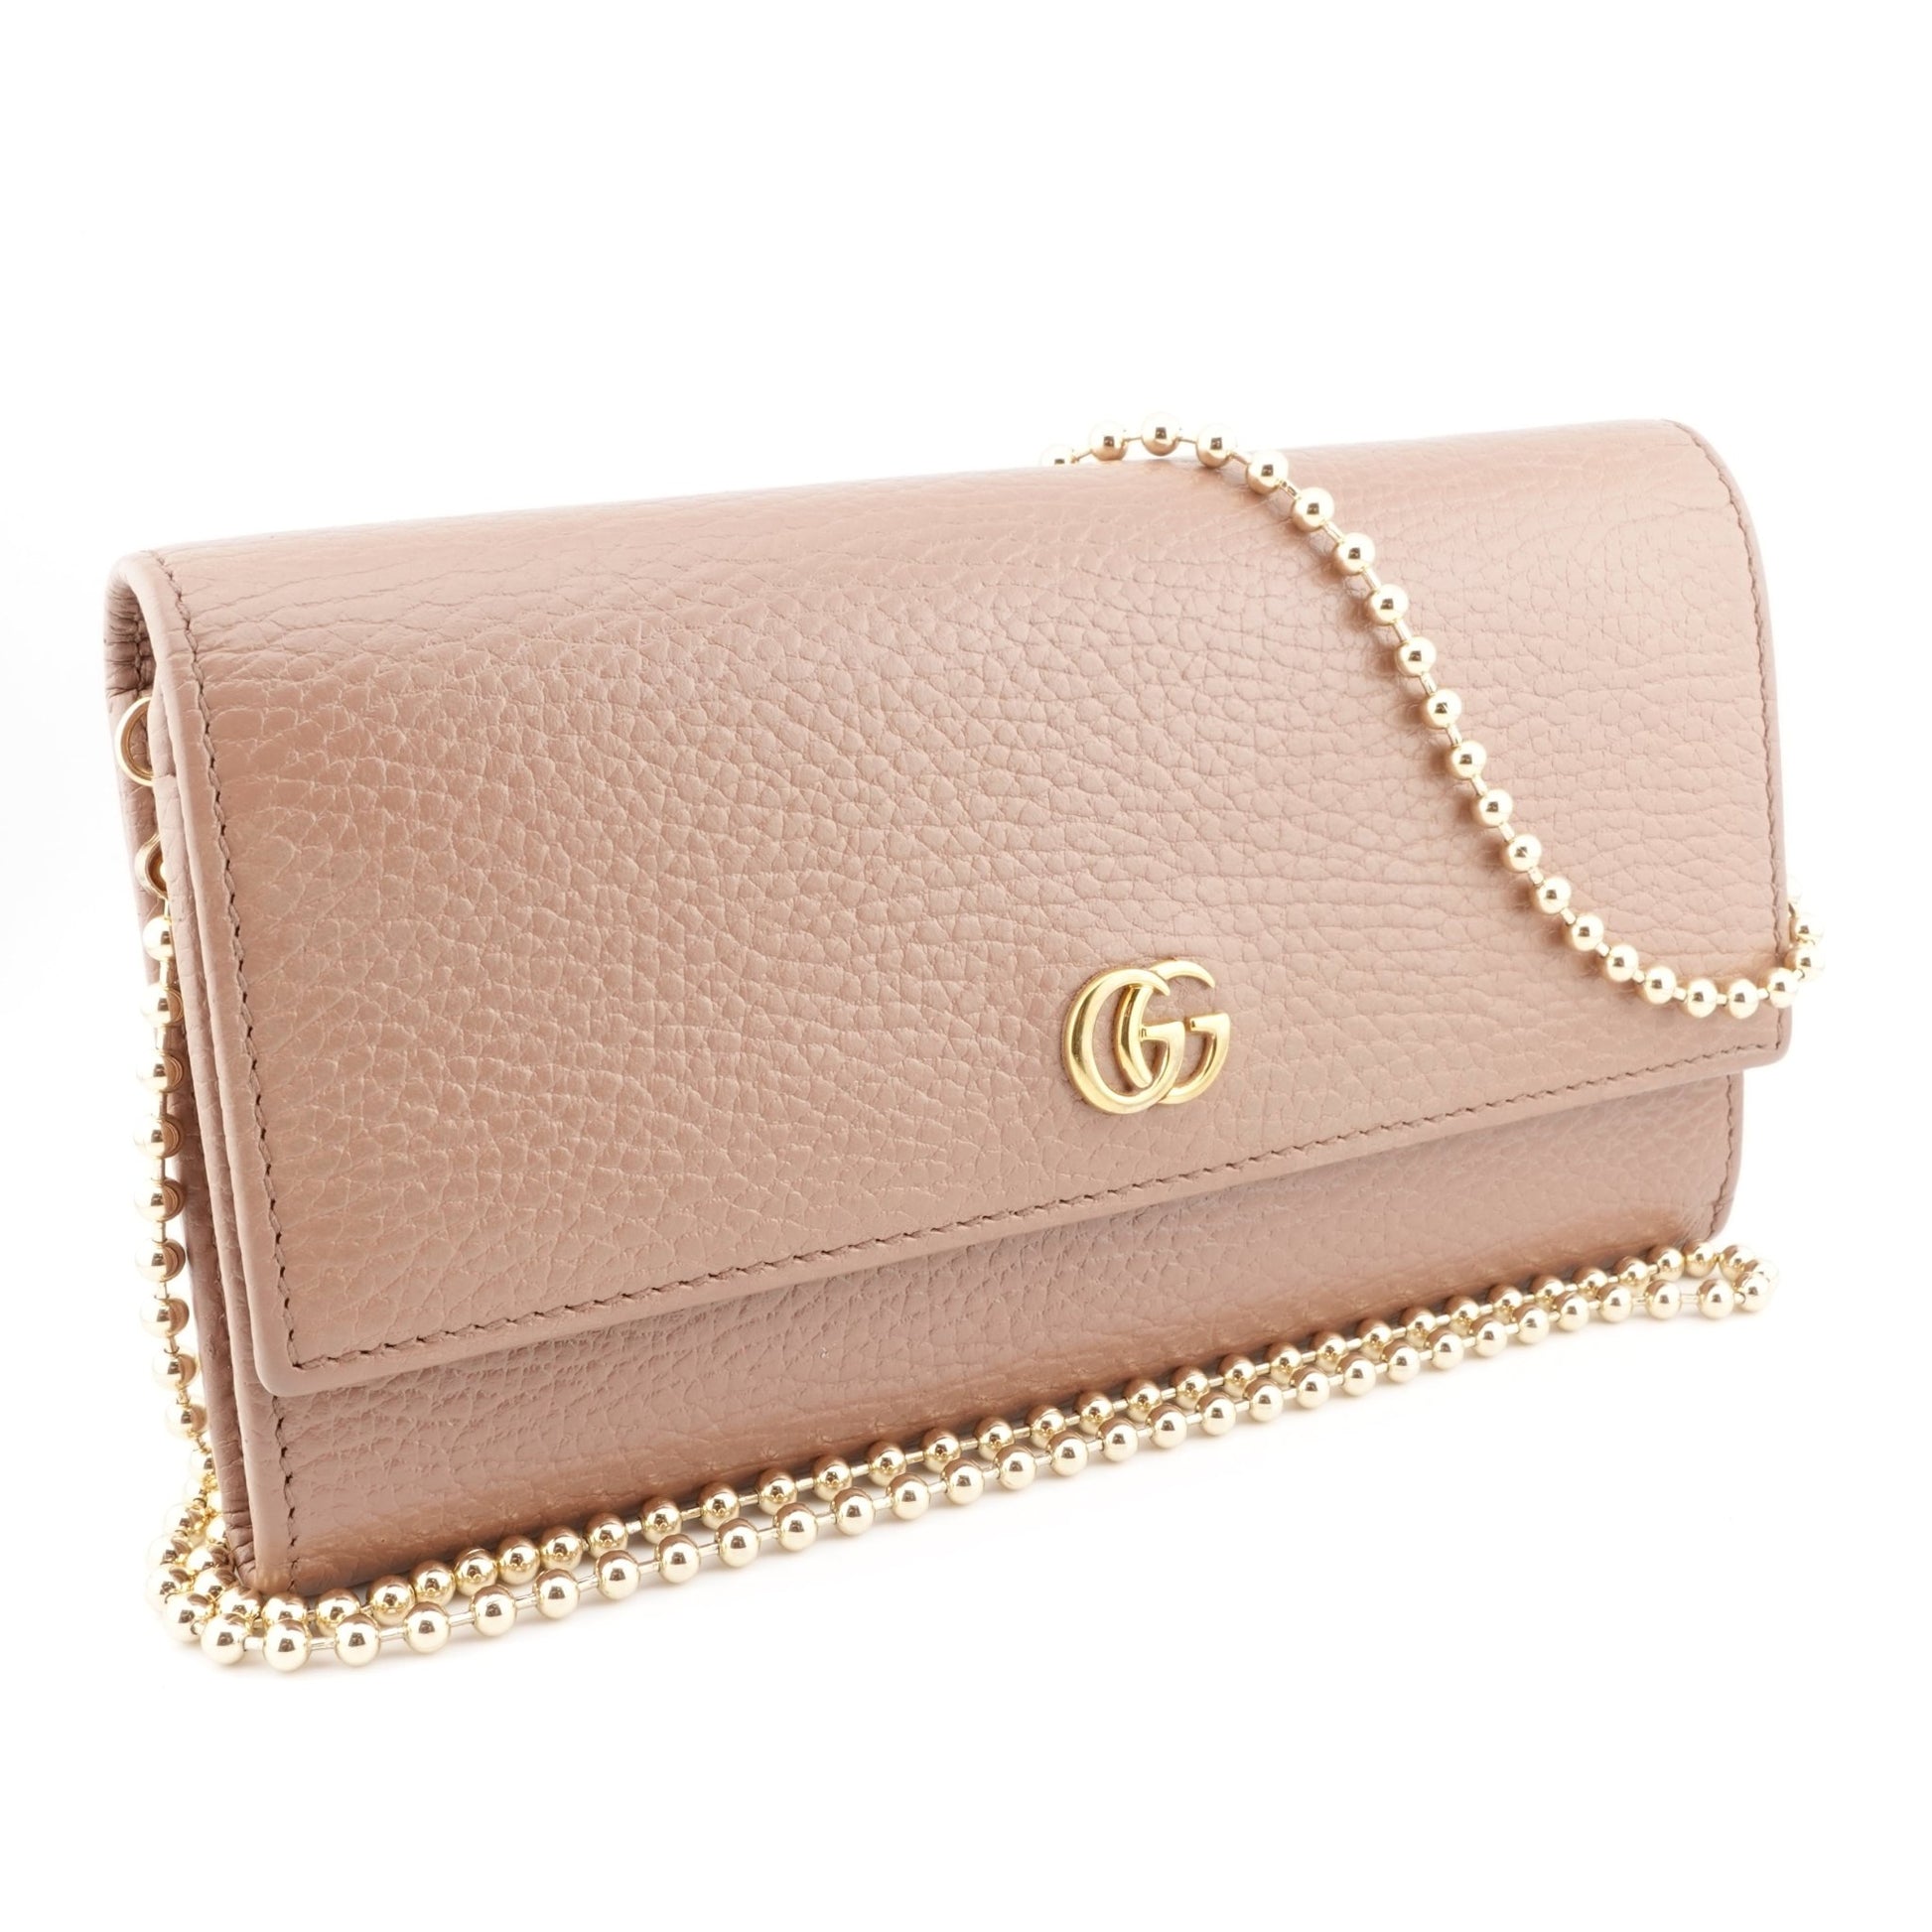 GUCCI Grained Leather GG Marmont Wallet On Chain - Bag Envy